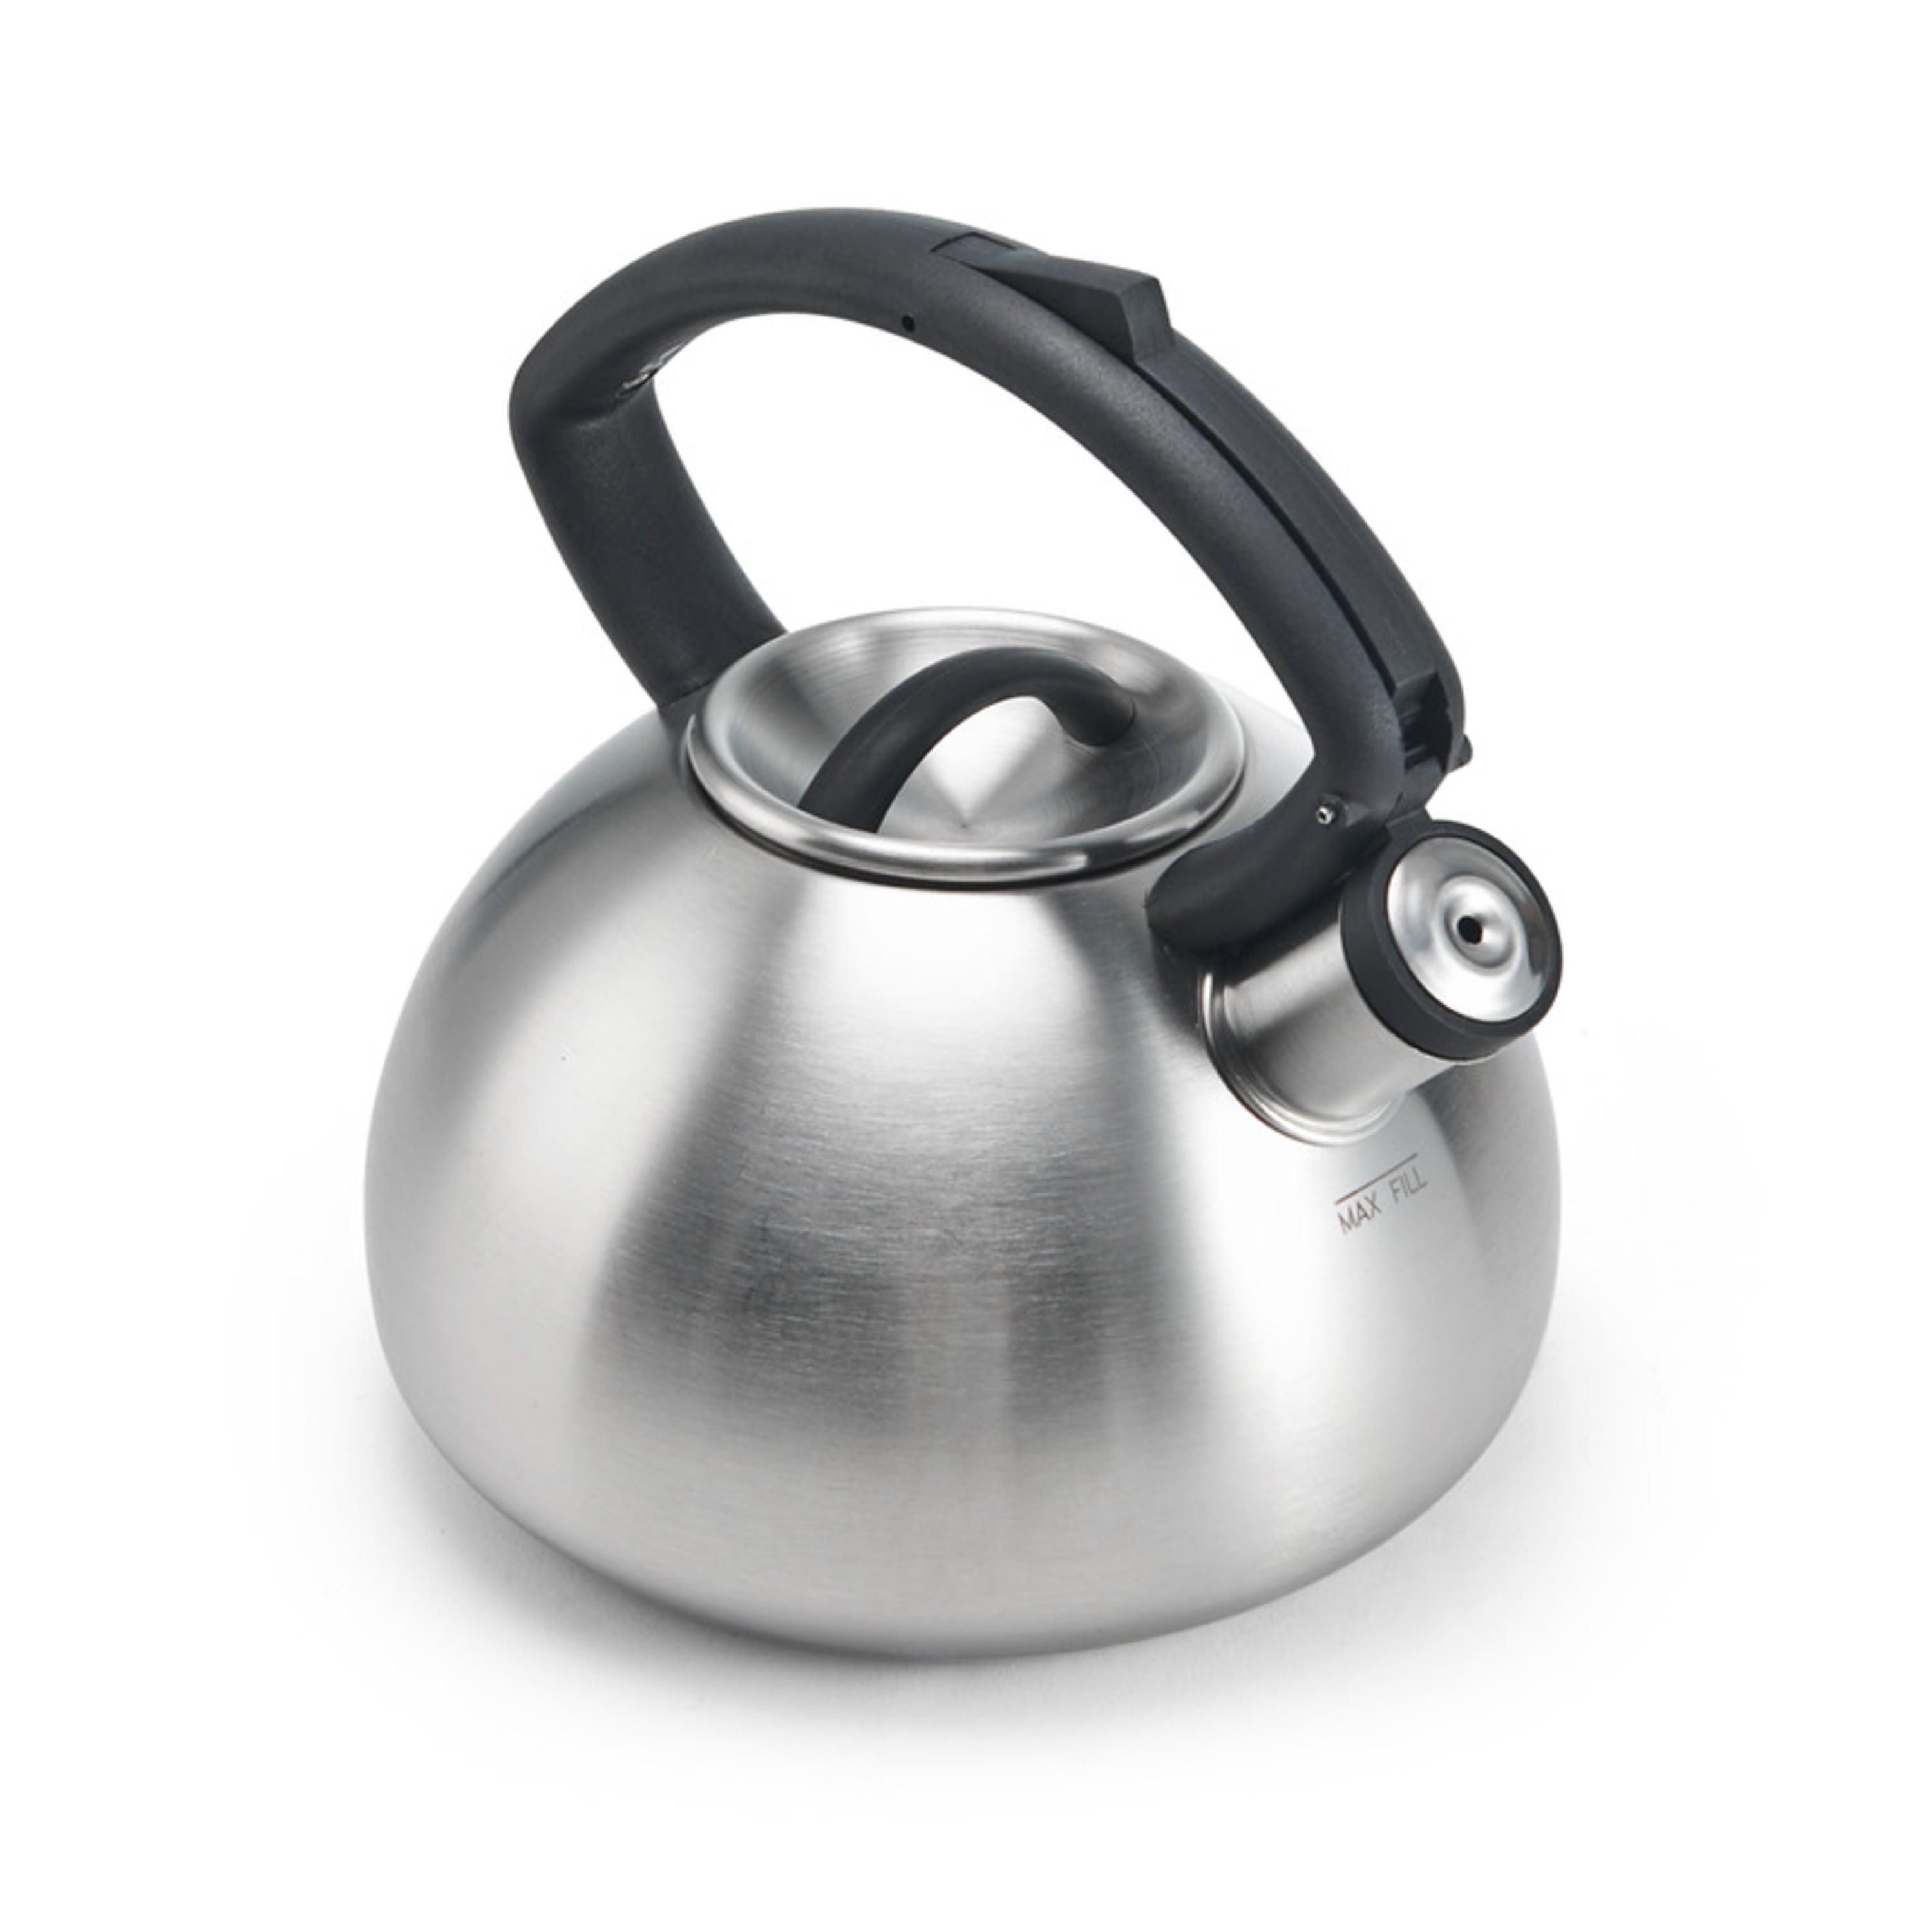  Copco Arc Brushed Tea Kettle, 1.8 quart, Stainless Steel: Home  & Kitchen